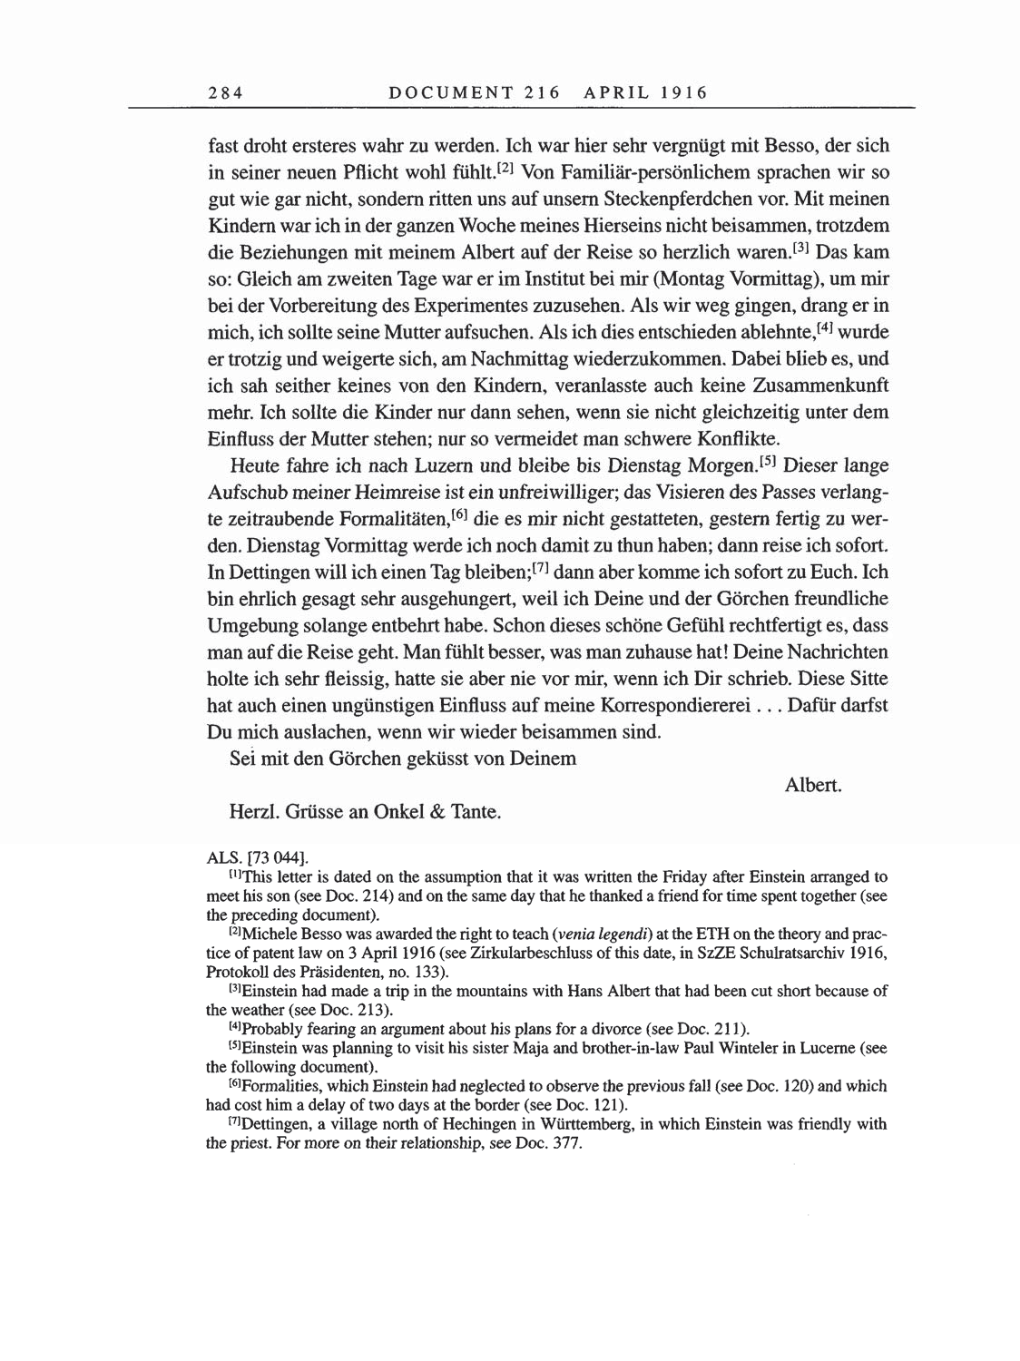 Volume 8, Part A: The Berlin Years: Correspondence 1914-1917 page 284